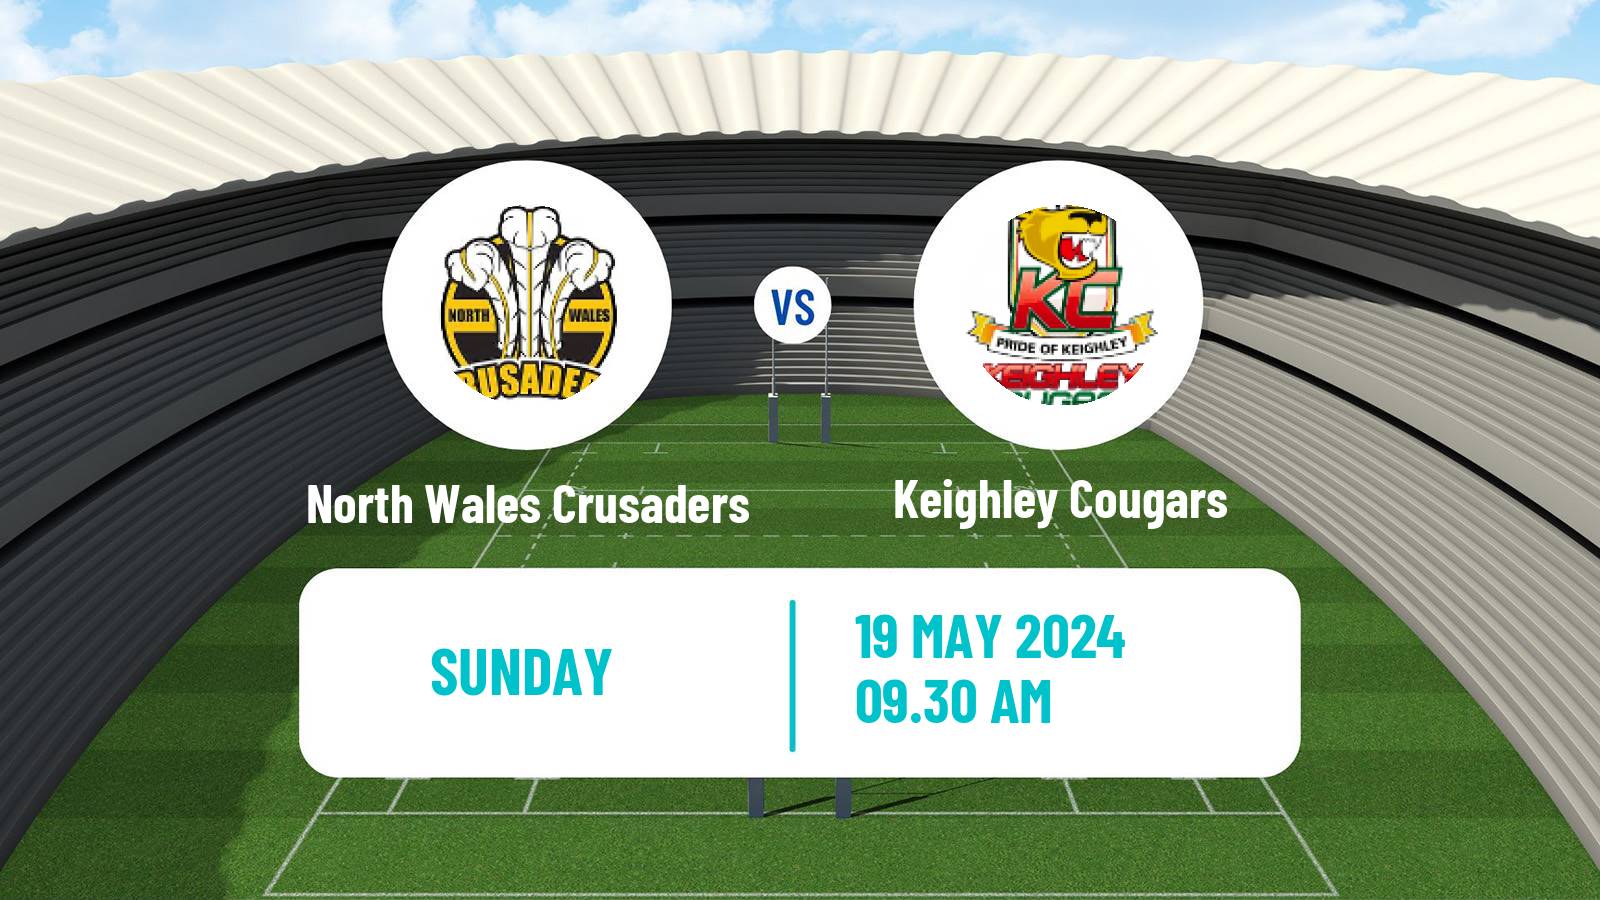 Rugby league English League 1 Rugby League North Wales Crusaders - Keighley Cougars